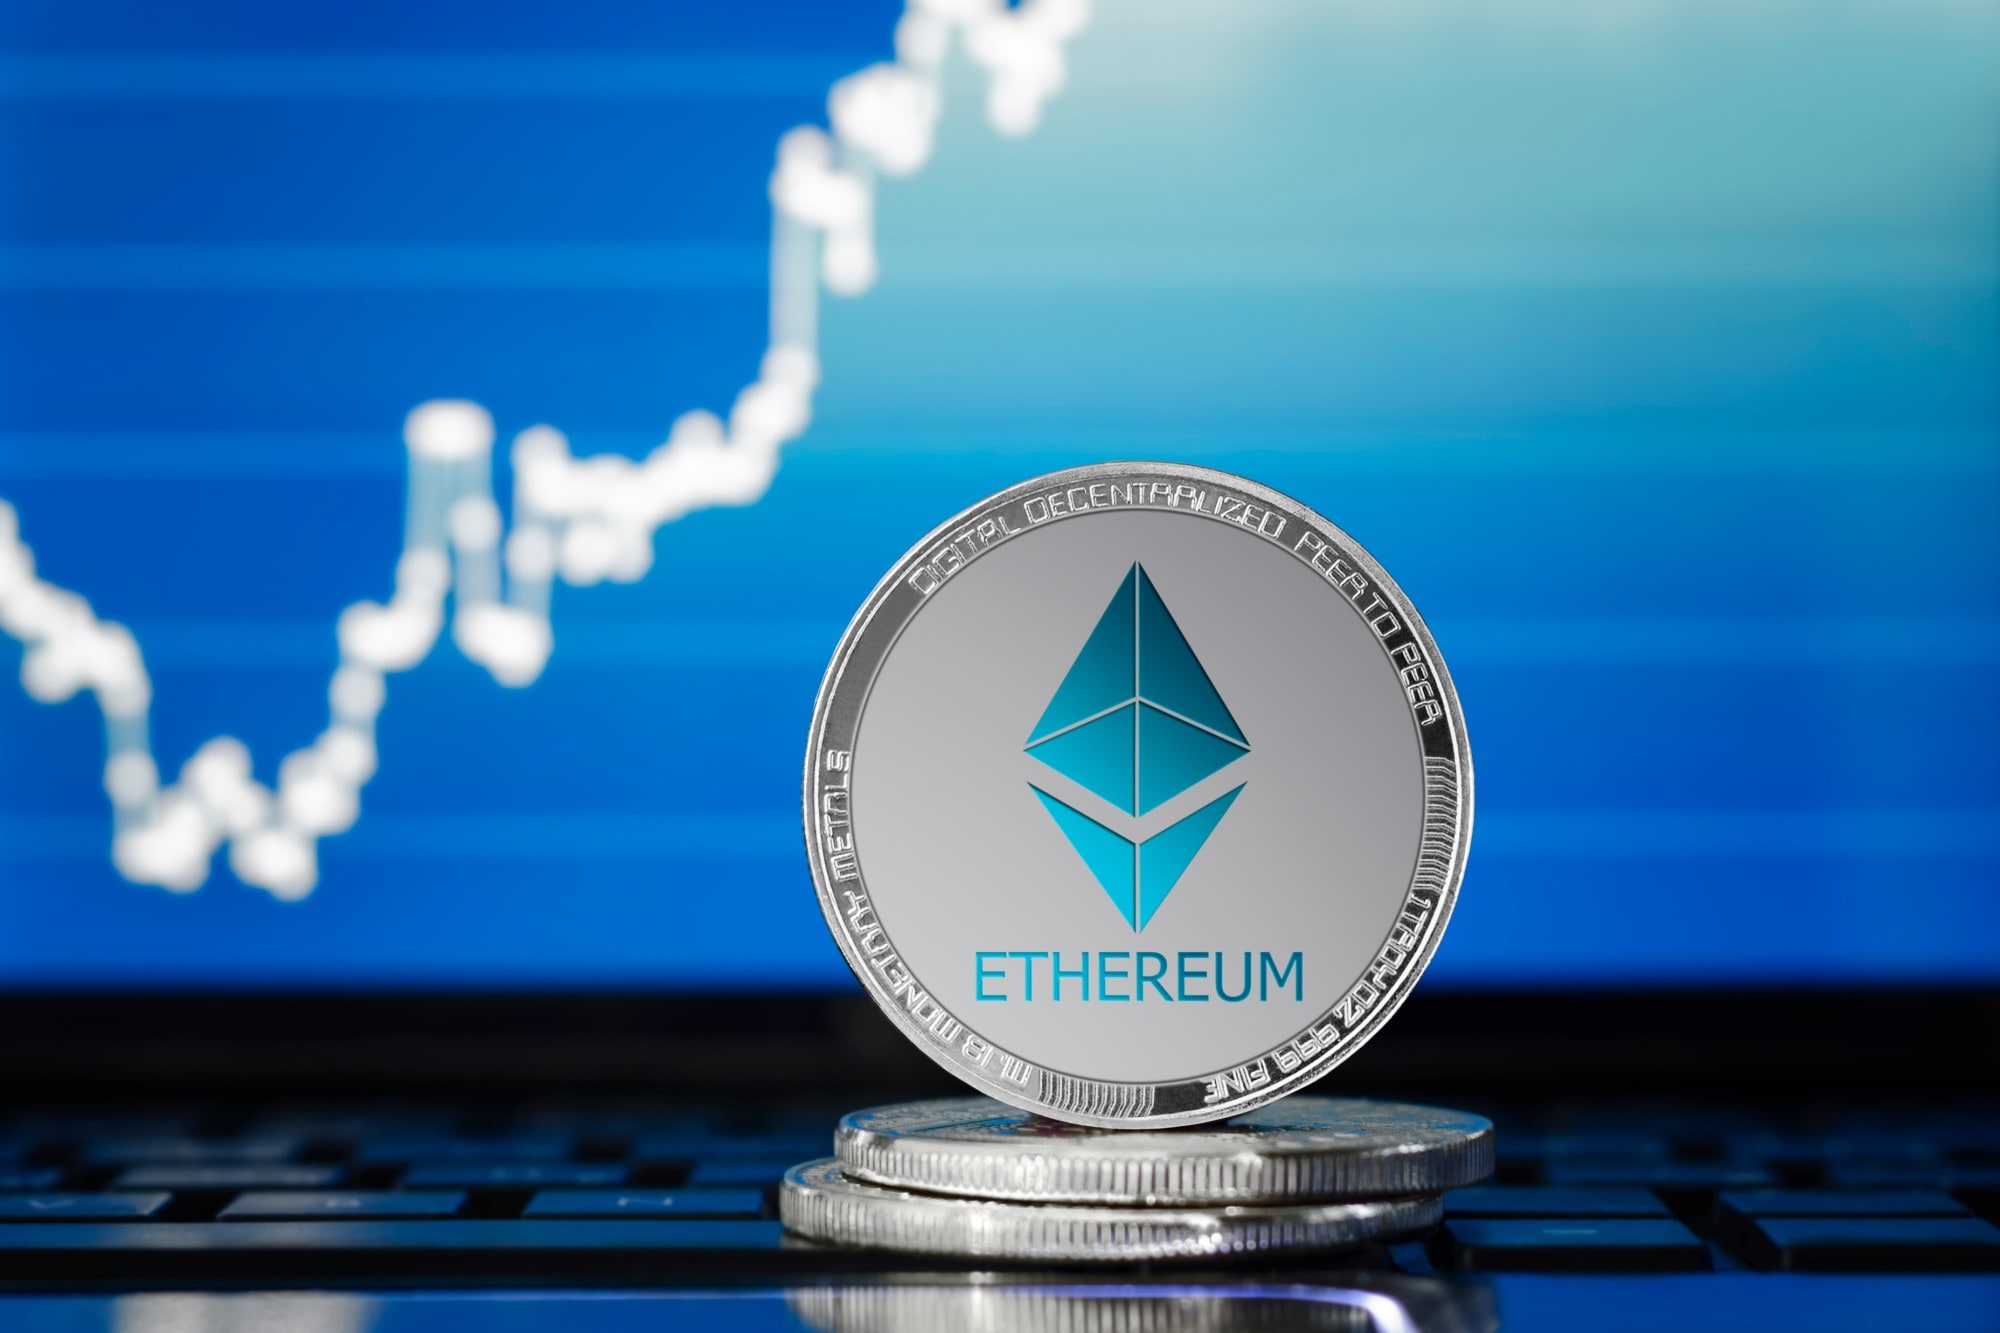  Ethereum:  It is the second most popular cryptocurrency in the market. Created by programmer Vilatik Buterin in 2014, the platform was designed to utilise blockchain technology to store programmes that can be used to power financial contracts and applications. Price: Rs 1,49,888. Market cap: USD 290 billion; Year-to-date performance: 159.6%.